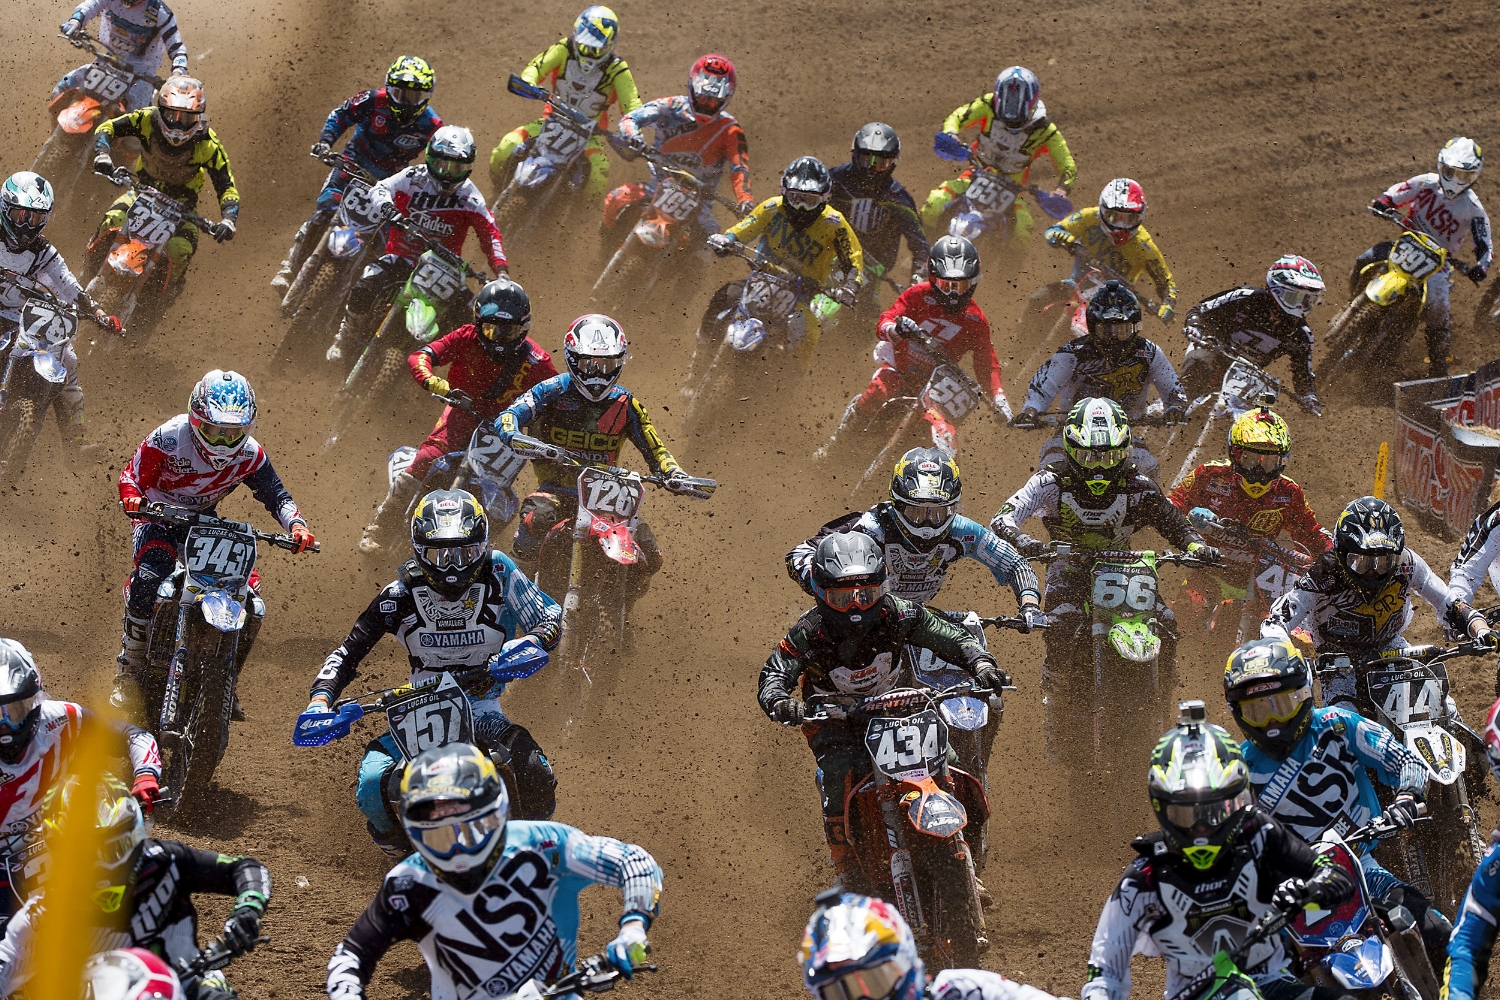  Riders race through the dirt in the first 250 moto during the annual Hangtown Motocross Classic motocross event at Prairie City SRVA in Rancho Cordova on Saturday, May 16, 2015. 